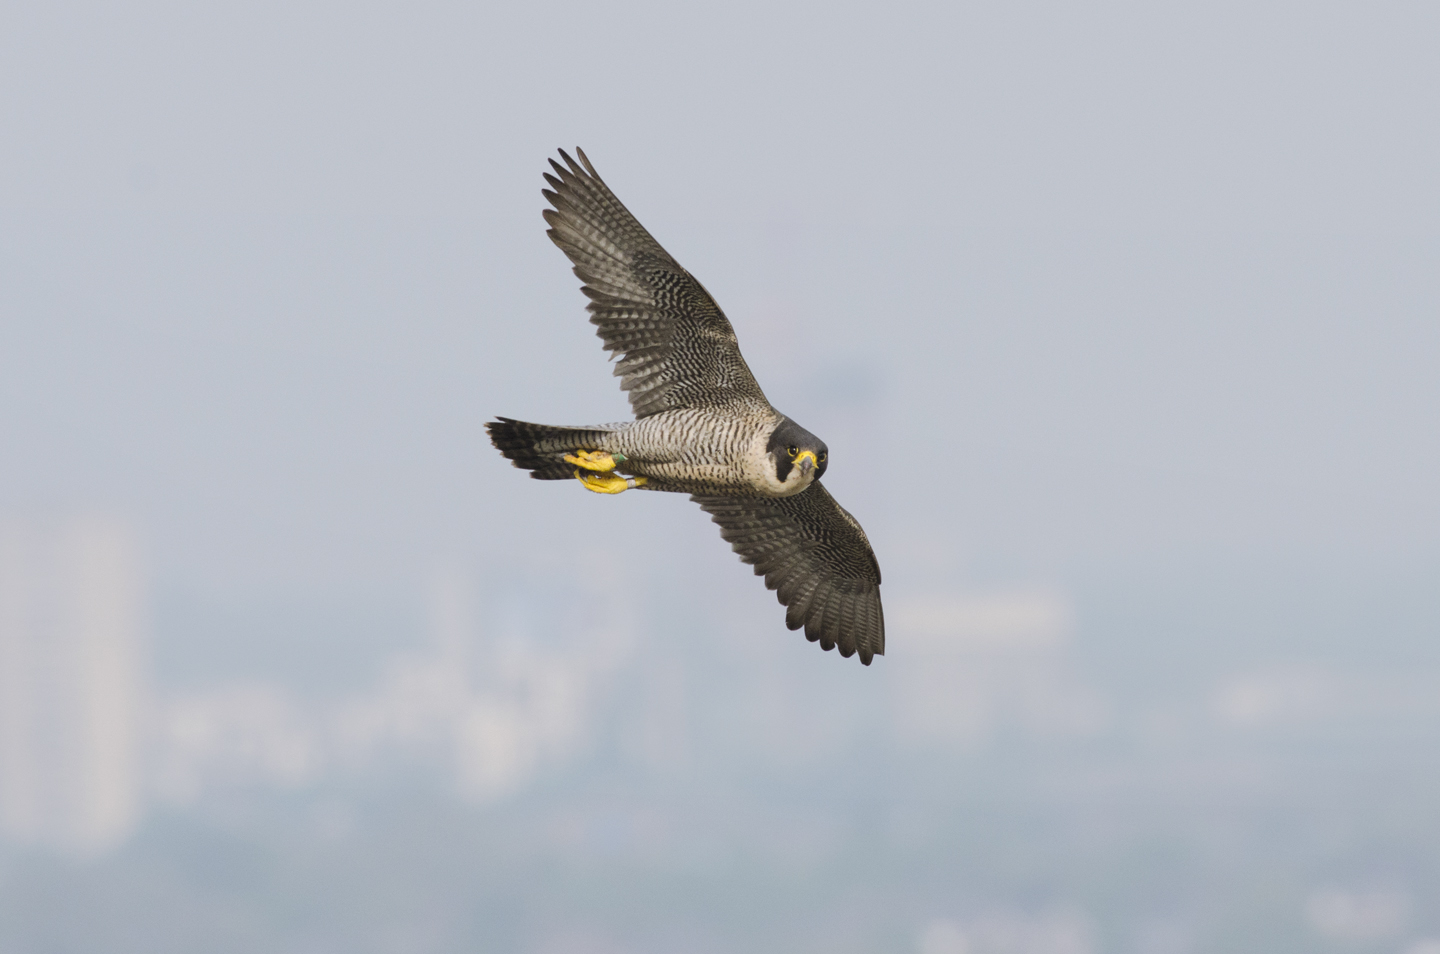  This has started to happen most noticeably in the south of England, where there are now more peregrines than ever before 